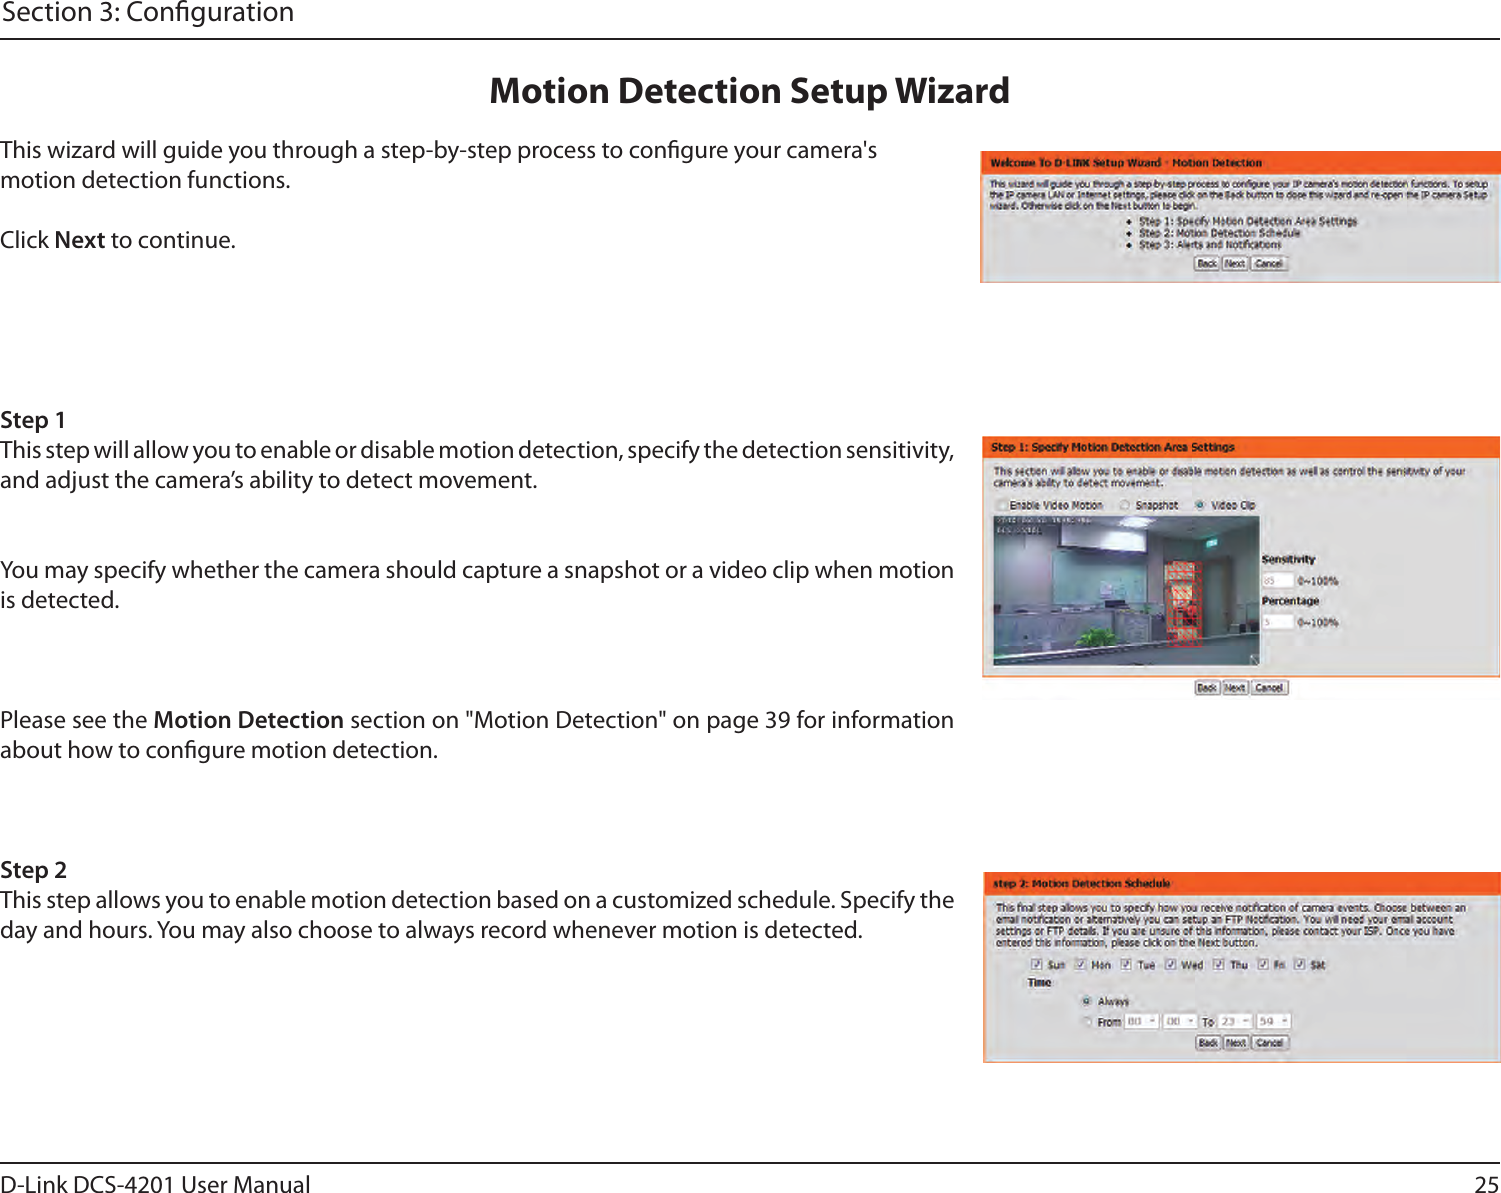 25D-Link DCS-4201 User ManualSection 3: CongurationThis wizard will guide you through a step-by-step process to congure your camera&apos;s motion detection functions.Click Next to continue.Step 1This step will allow you to enable or disable motion detection, specify the detection sensitivity, and adjust the camera’s ability to detect movement.You may specify whether the camera should capture a snapshot or a video clip when motion is detected.Please see the Motion Detection section on &quot;Motion Detection&quot; on page 39 for information about how to congure motion detection.Step 2This step allows you to enable motion detection based on a customized schedule. Specify the day and hours. You may also choose to always record whenever motion is detected.Motion Detection Setup Wizard